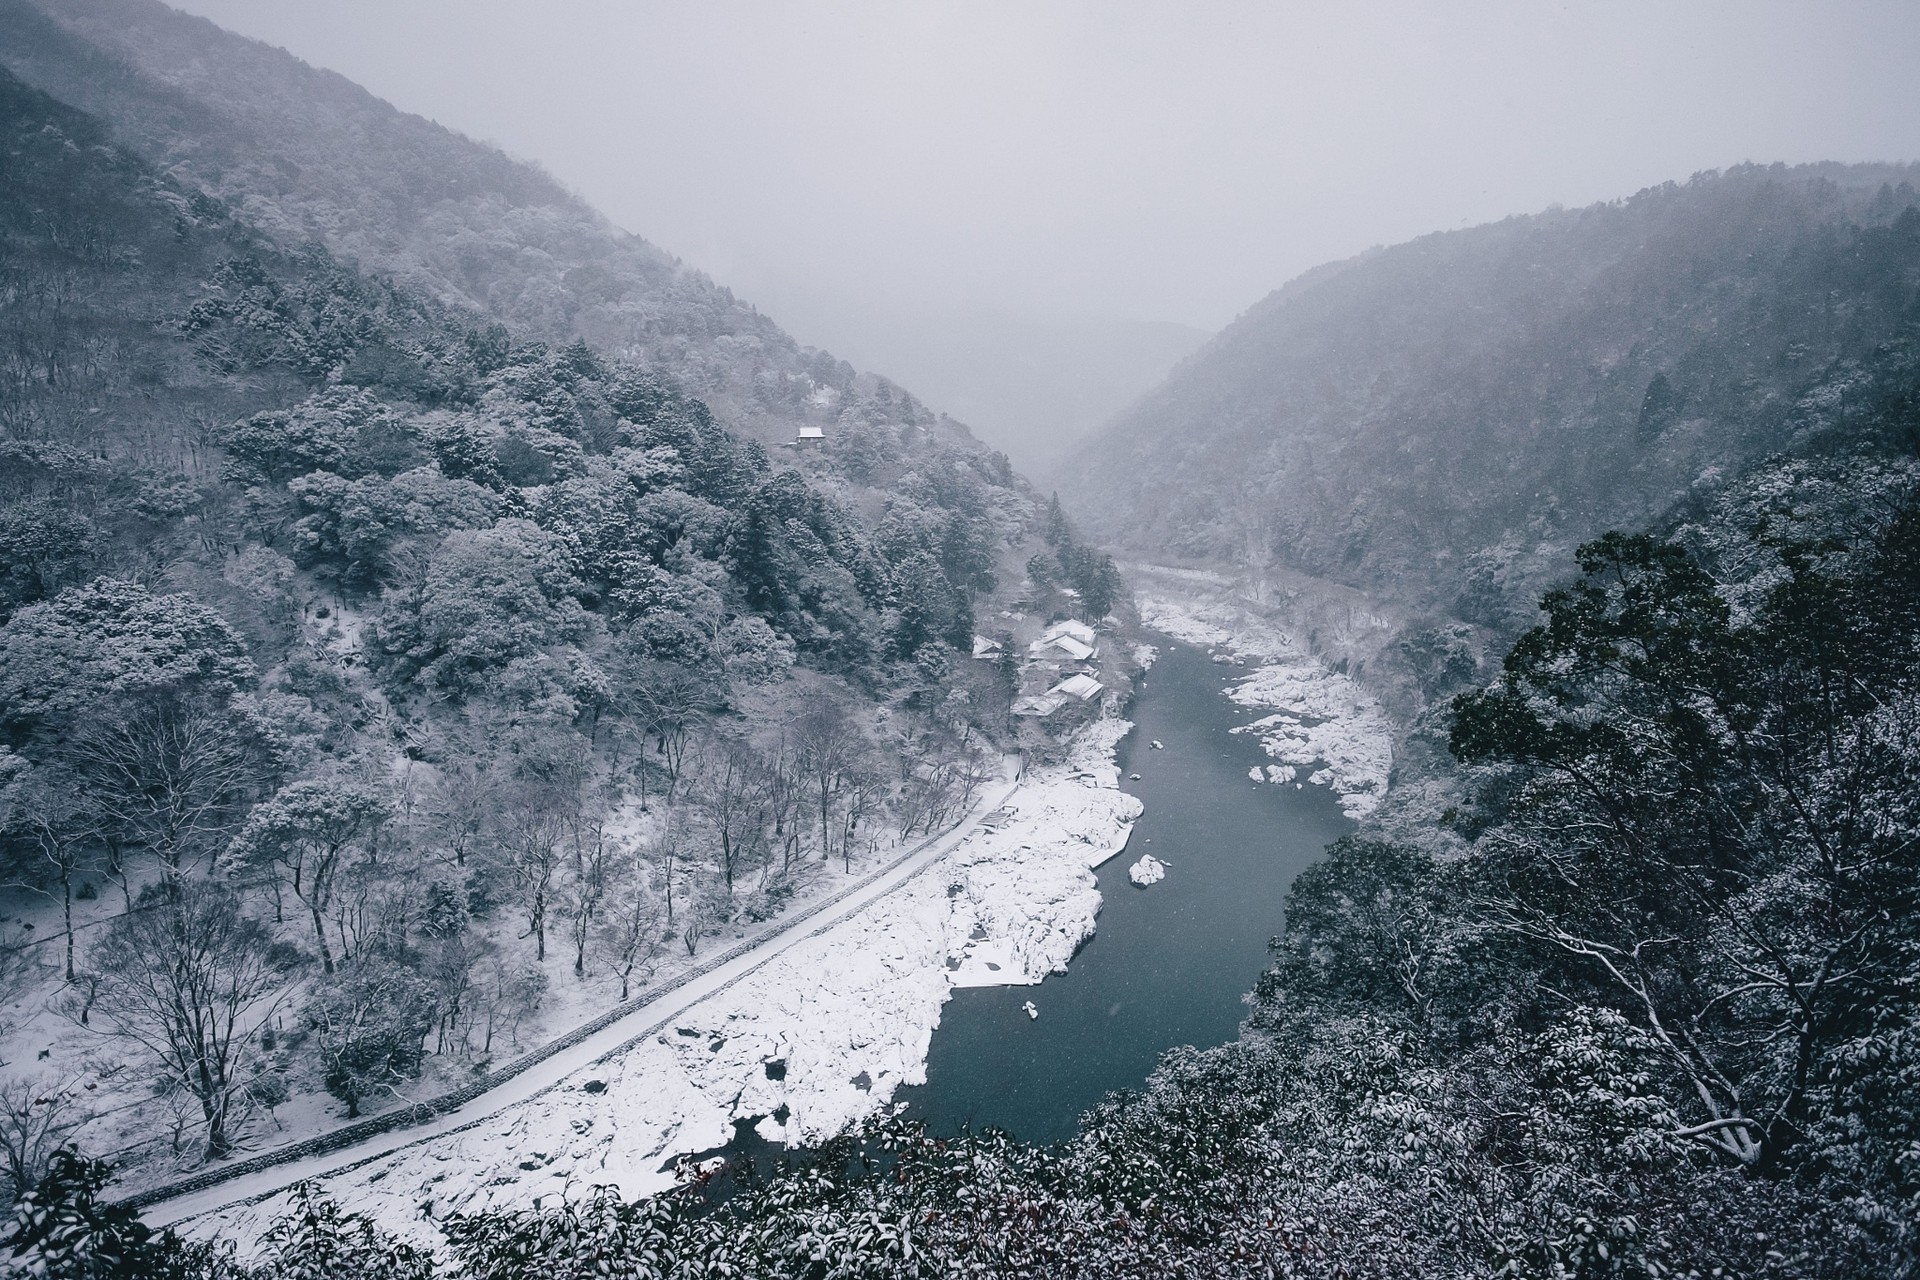 General 1920x1280 nature landscape river winter mountains forest snow trees mist Japan Asia